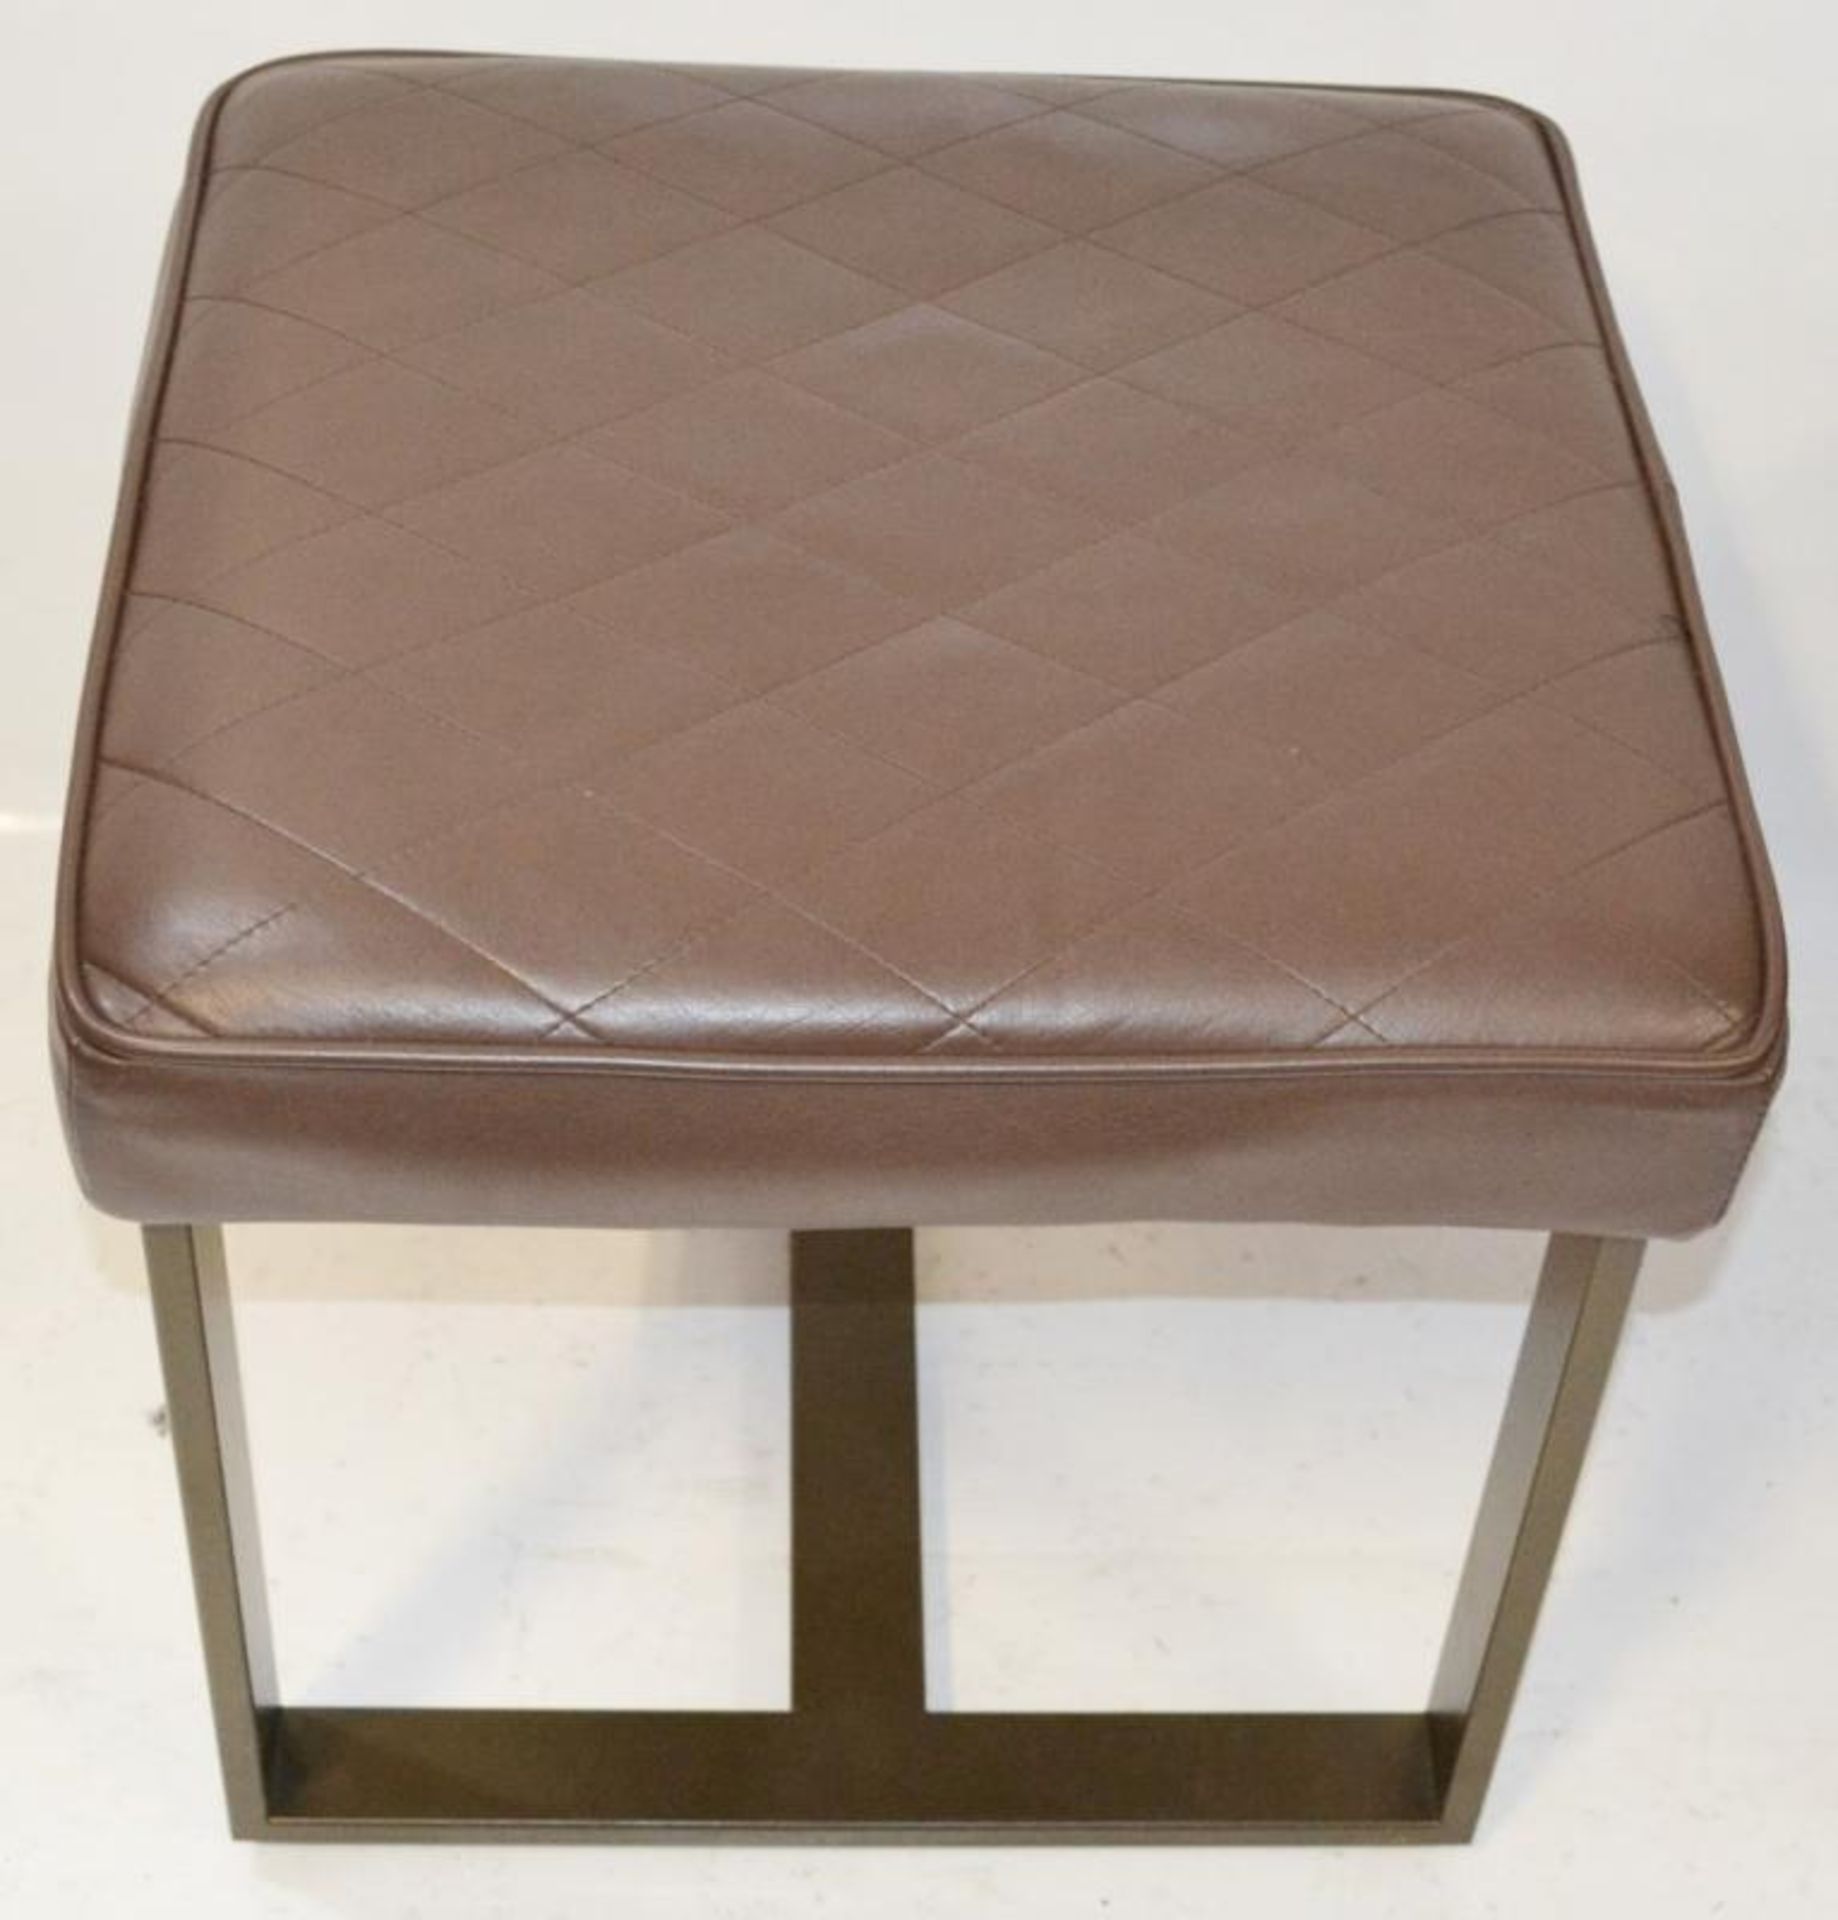 8 x Contemporary Seat Stools With Brown Faux Leather Cushioned Seat Pads - Recently Removed From - Image 6 of 6